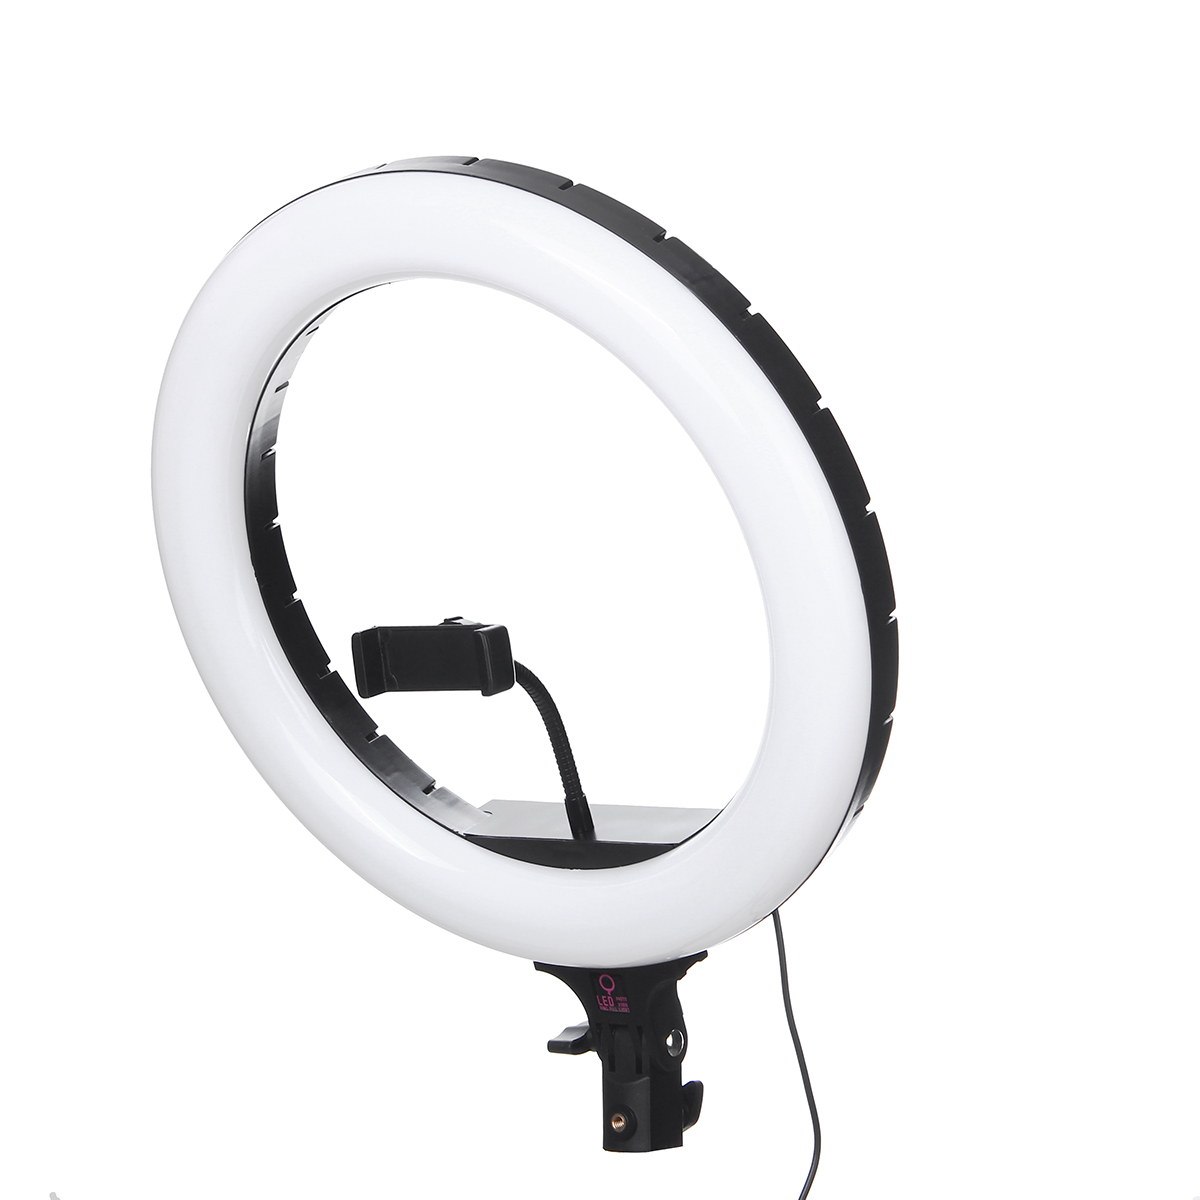 710131518-Inch-LED-Ring-Light-Studio-Fill-Light-Tripod-Stand-Photo-Makeup-Live-Dimmable-Lamp-for-You-1708205-12